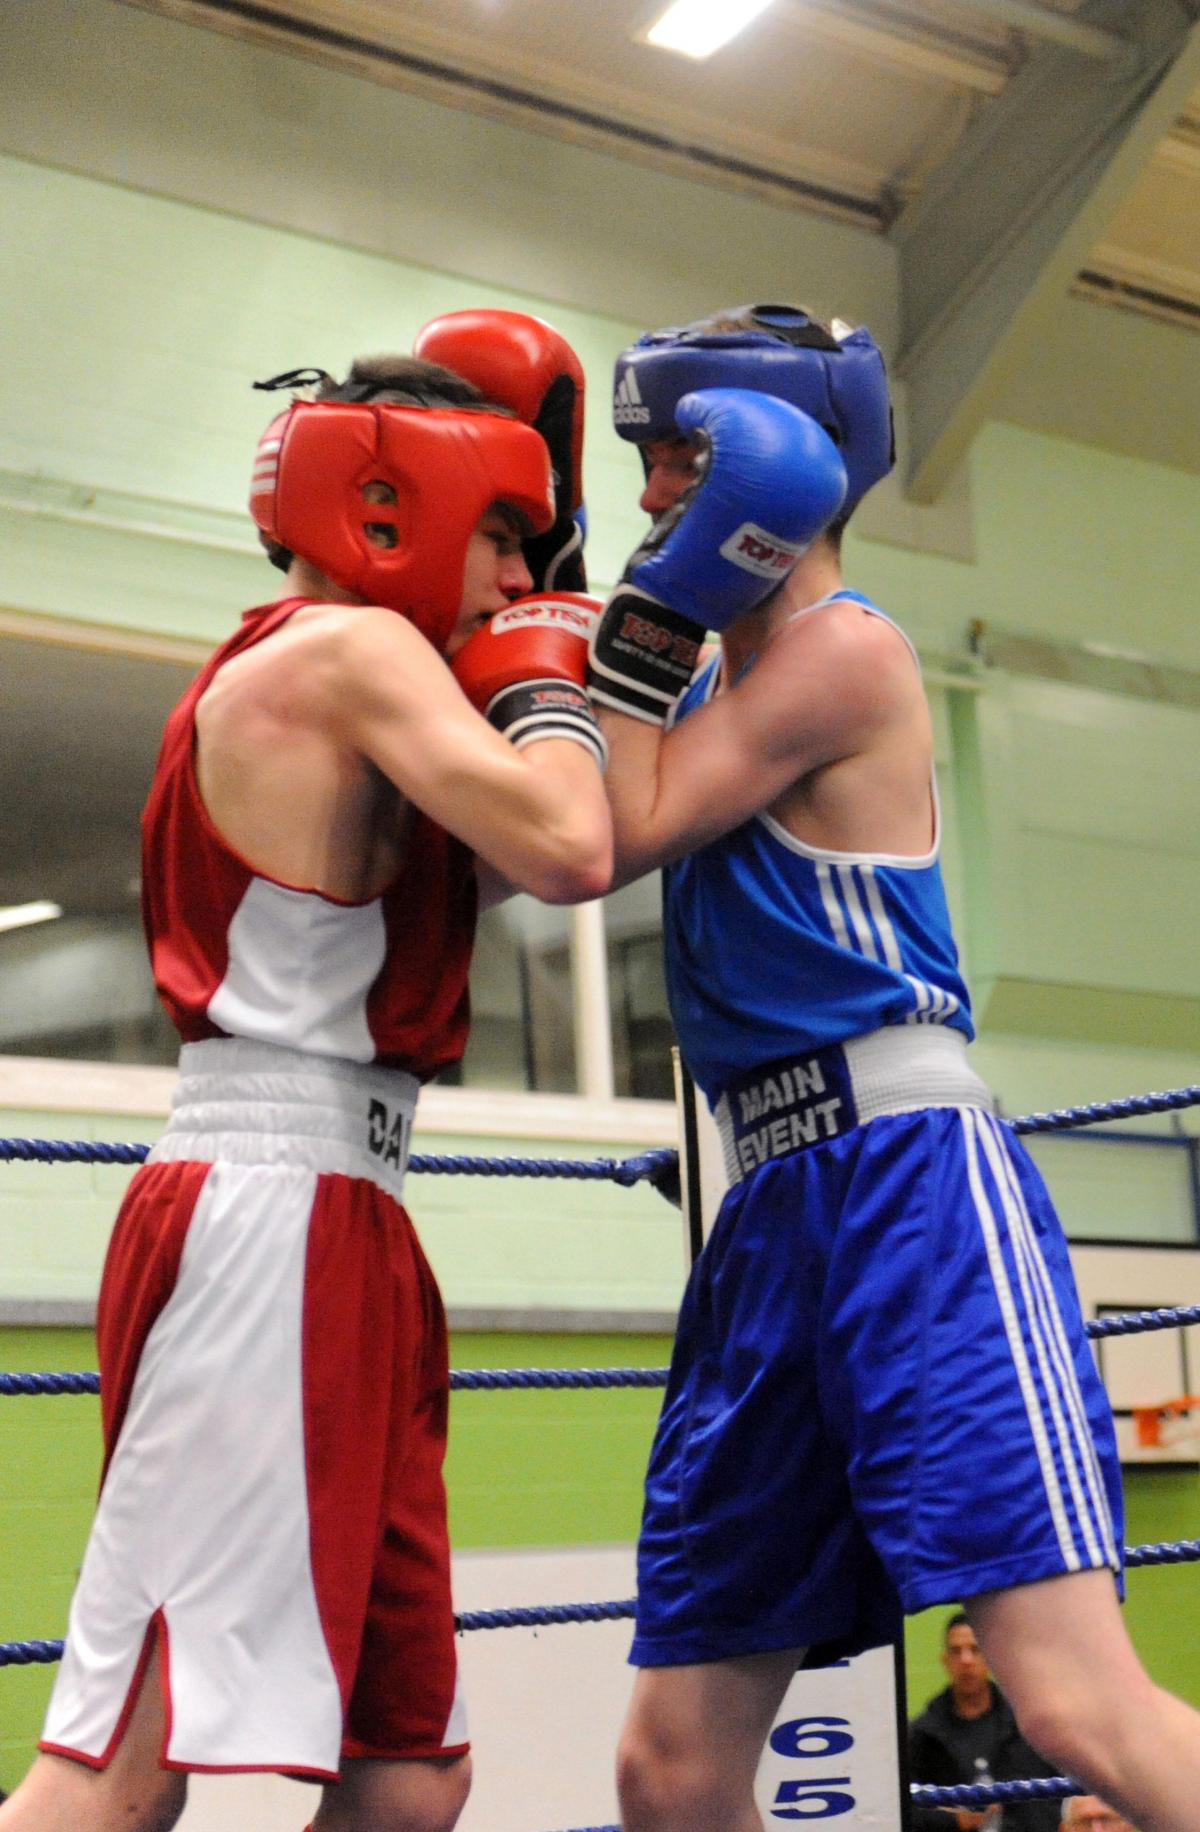 Boxing night at James Hornsby school, organised by Berry boxing club
red hat Danny Davis from Danson ABC v JAck McInerney from Billericay ABC in the blue hat